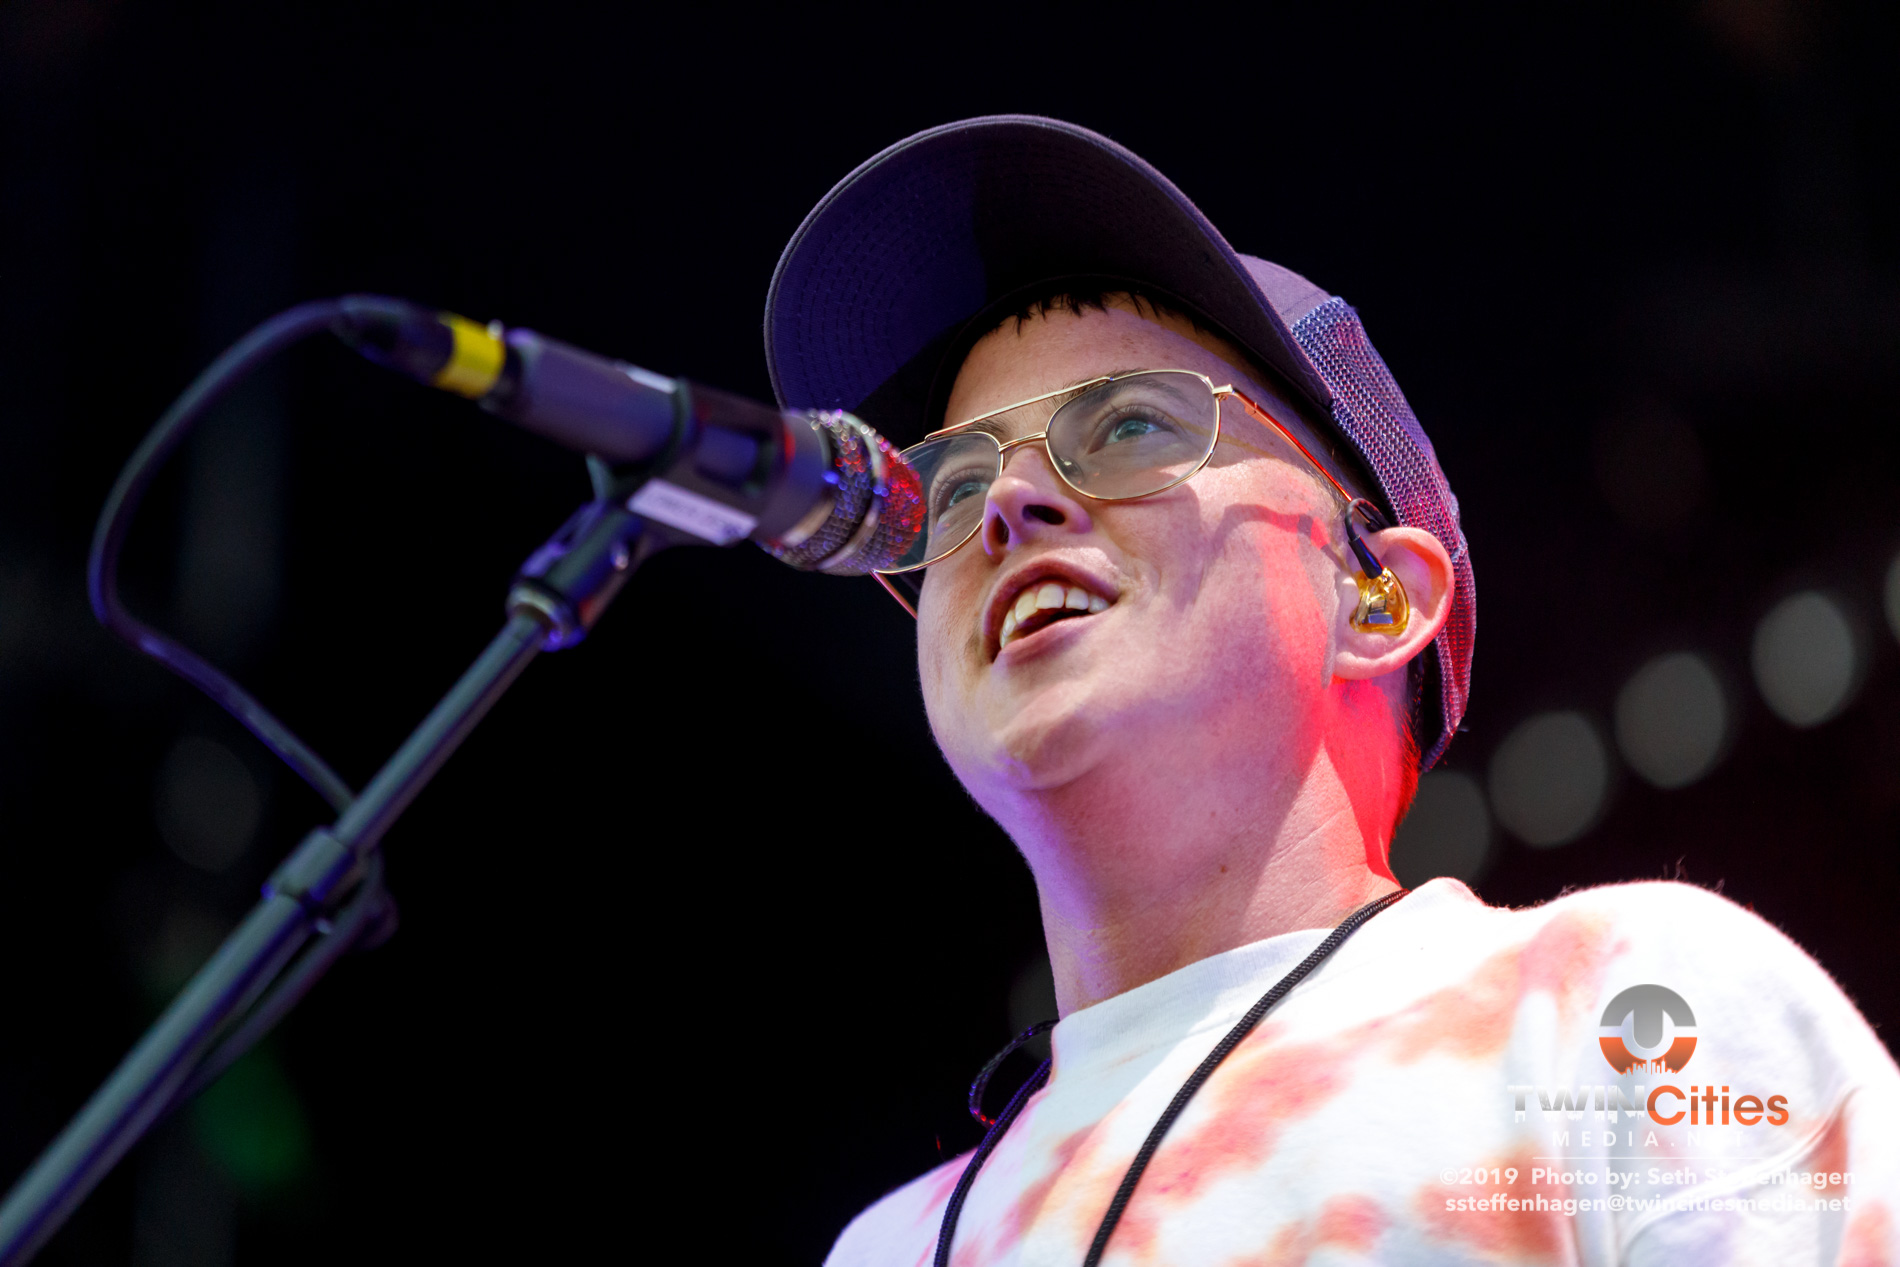 September 14, 2019 - Minneapolis, Minnesota, United States -  Lower Dens live in concert at Surly Brewing Festival Field opening for Of Monsters And Men.

(Photo by Seth Steffenhagen/Steffenhagen Photography)